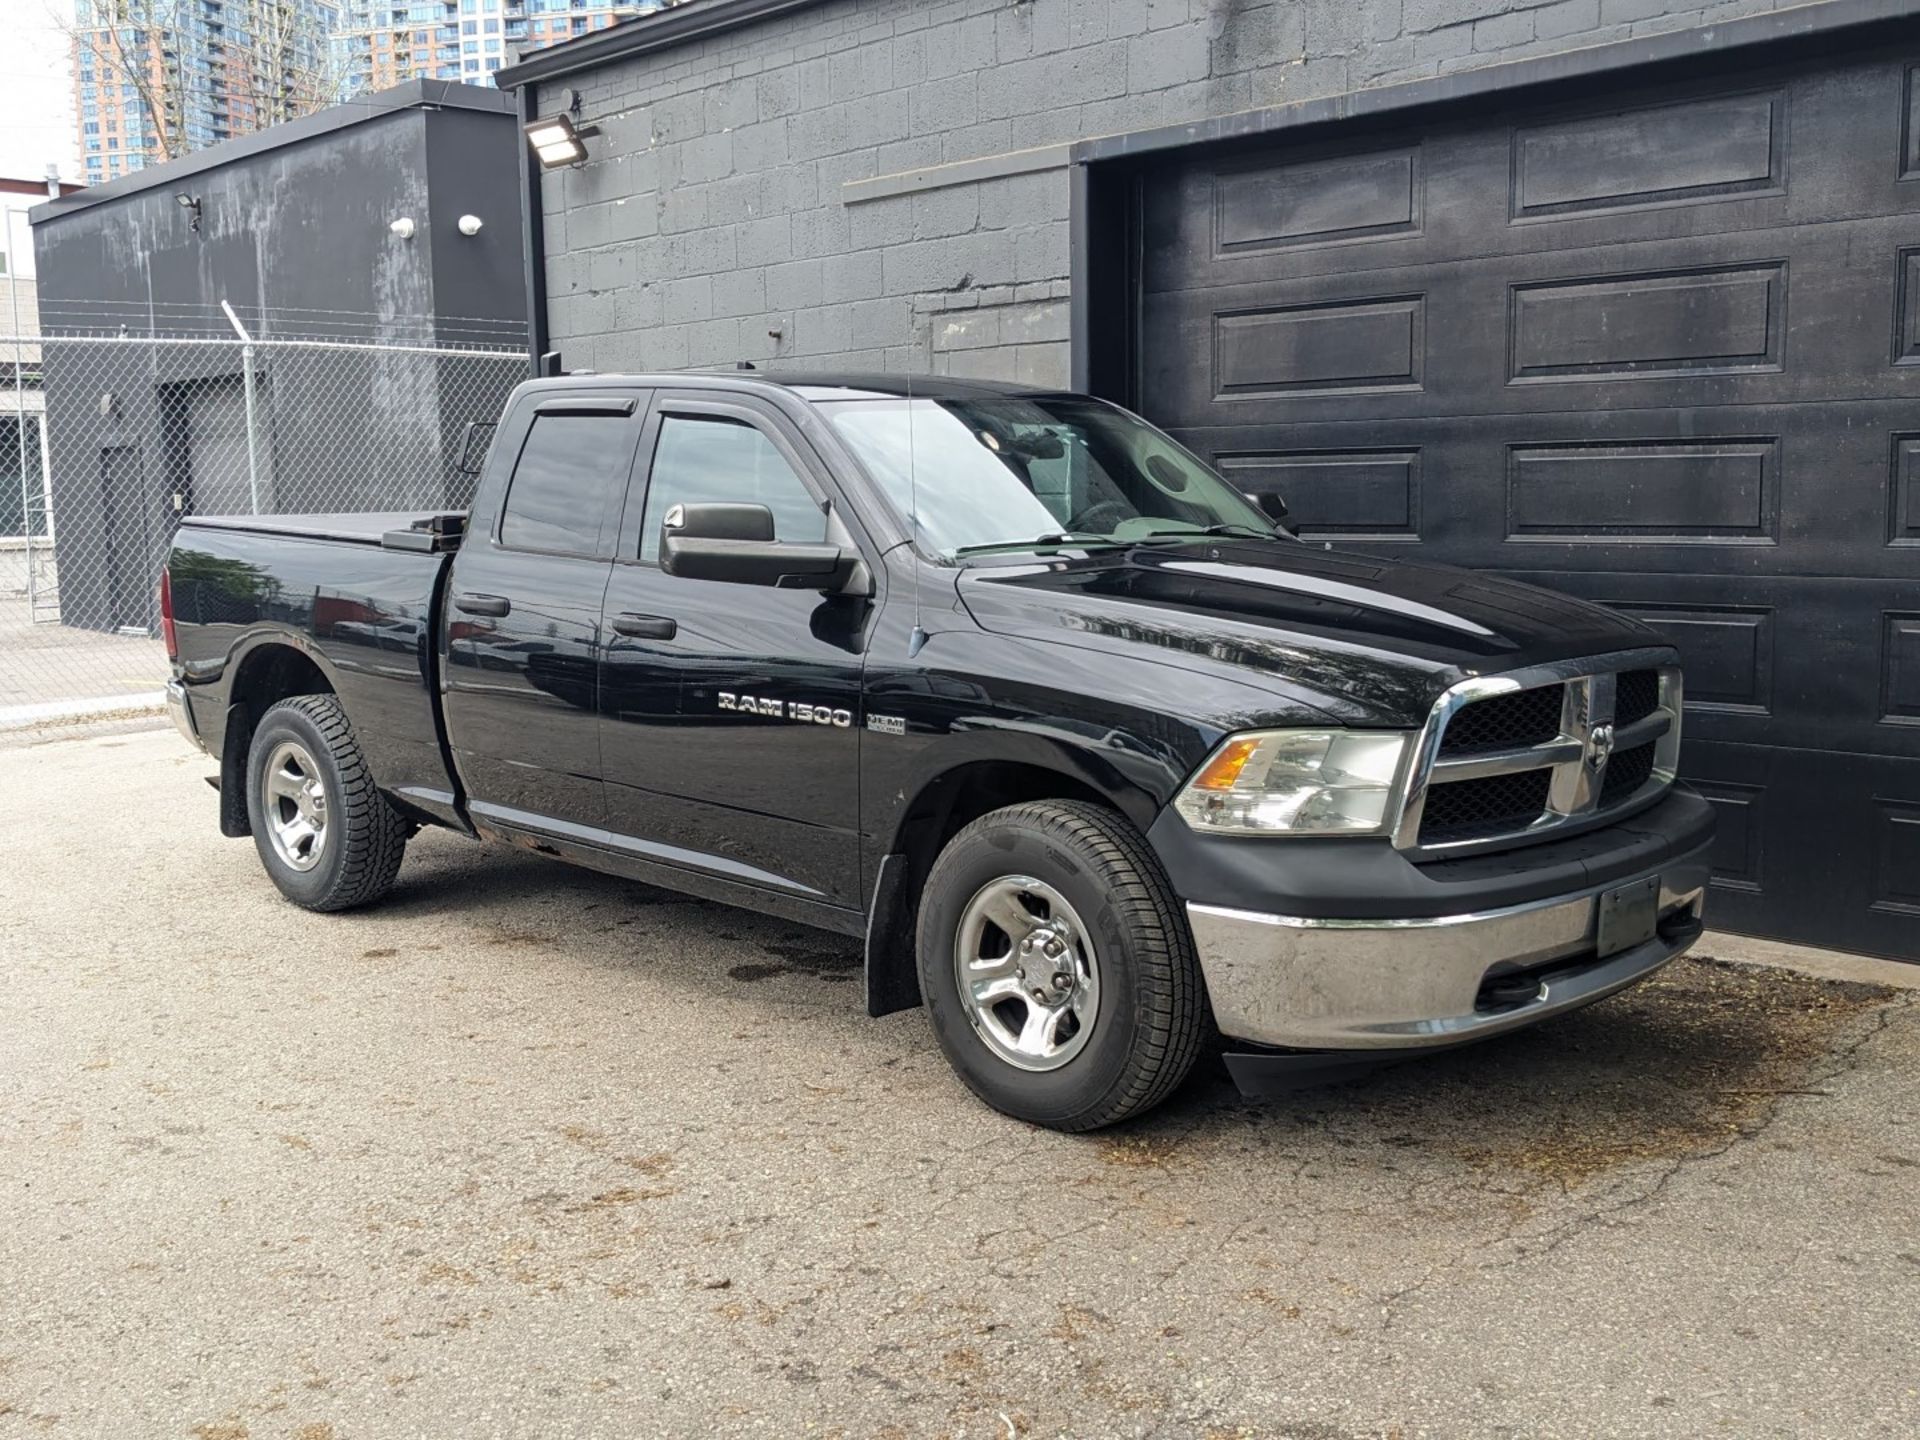 DODGE (2012) RAM 1500 QUAD CAB PICKUP TRUCK WITH 5.7 LITER HEMI V8 GAS ENGINE, AUTO, 4X4, TOUCH - Image 8 of 25